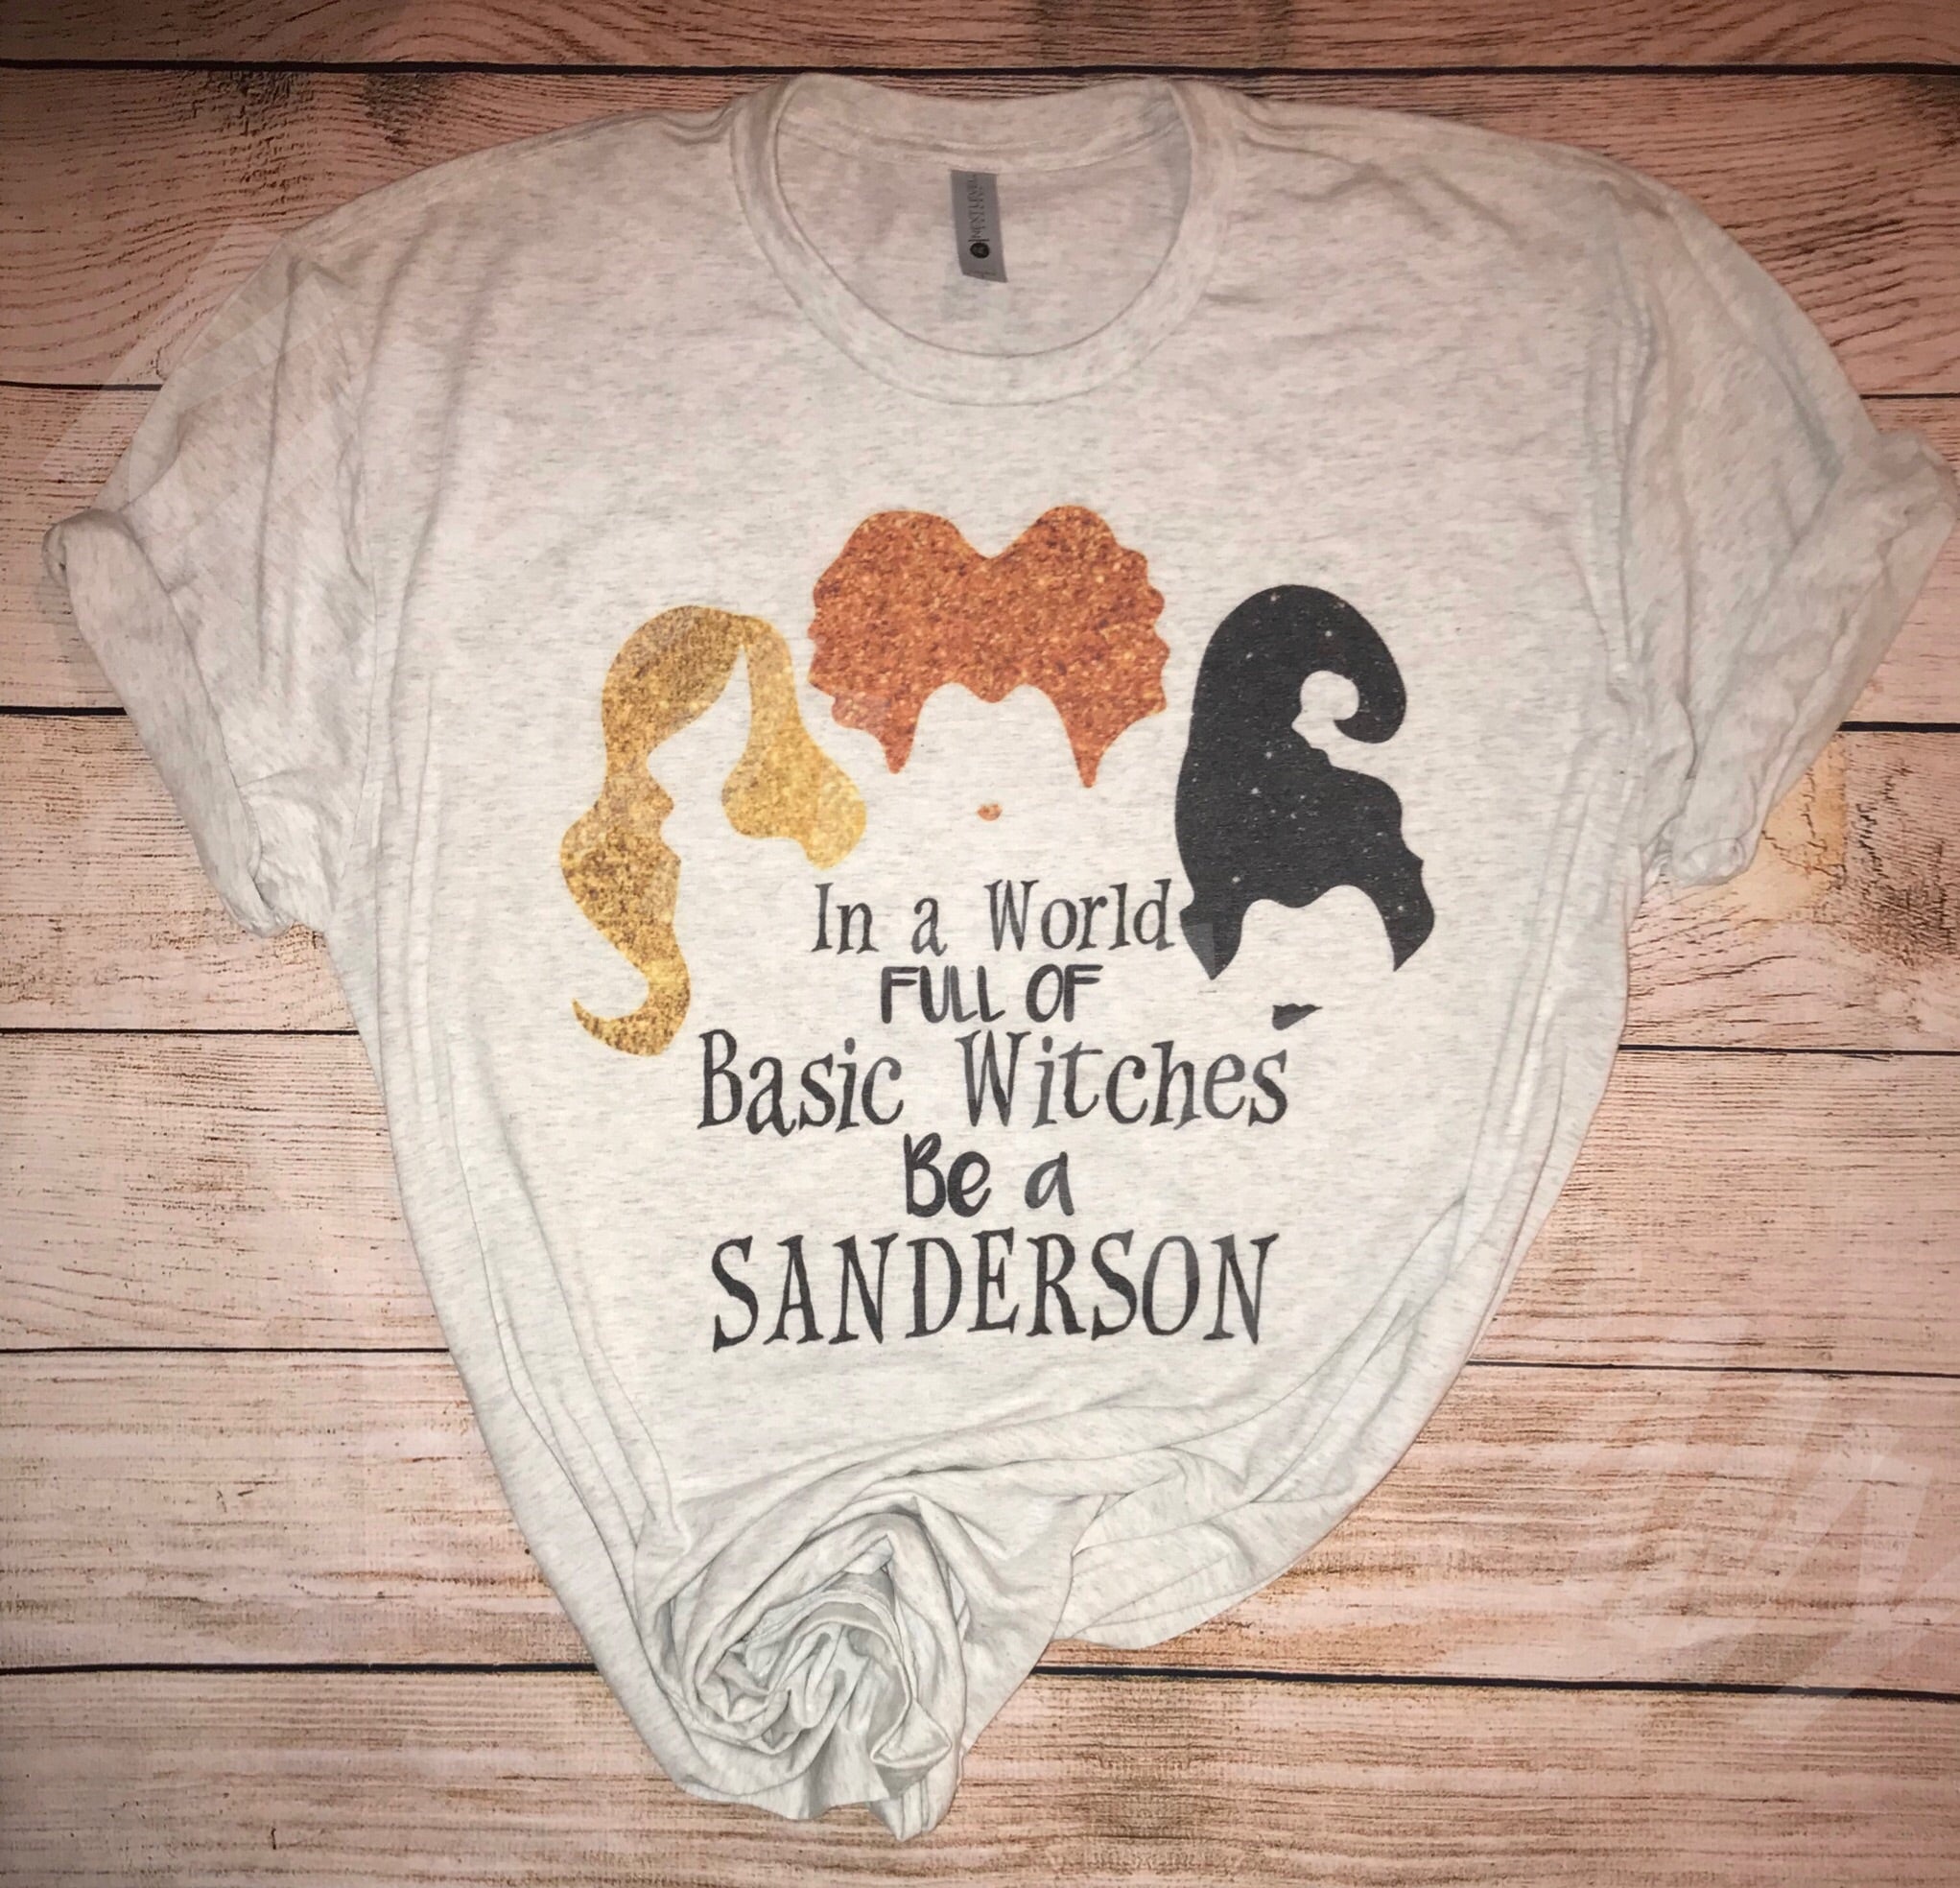 In a world full of basic witches be a Sanderson T-shirt